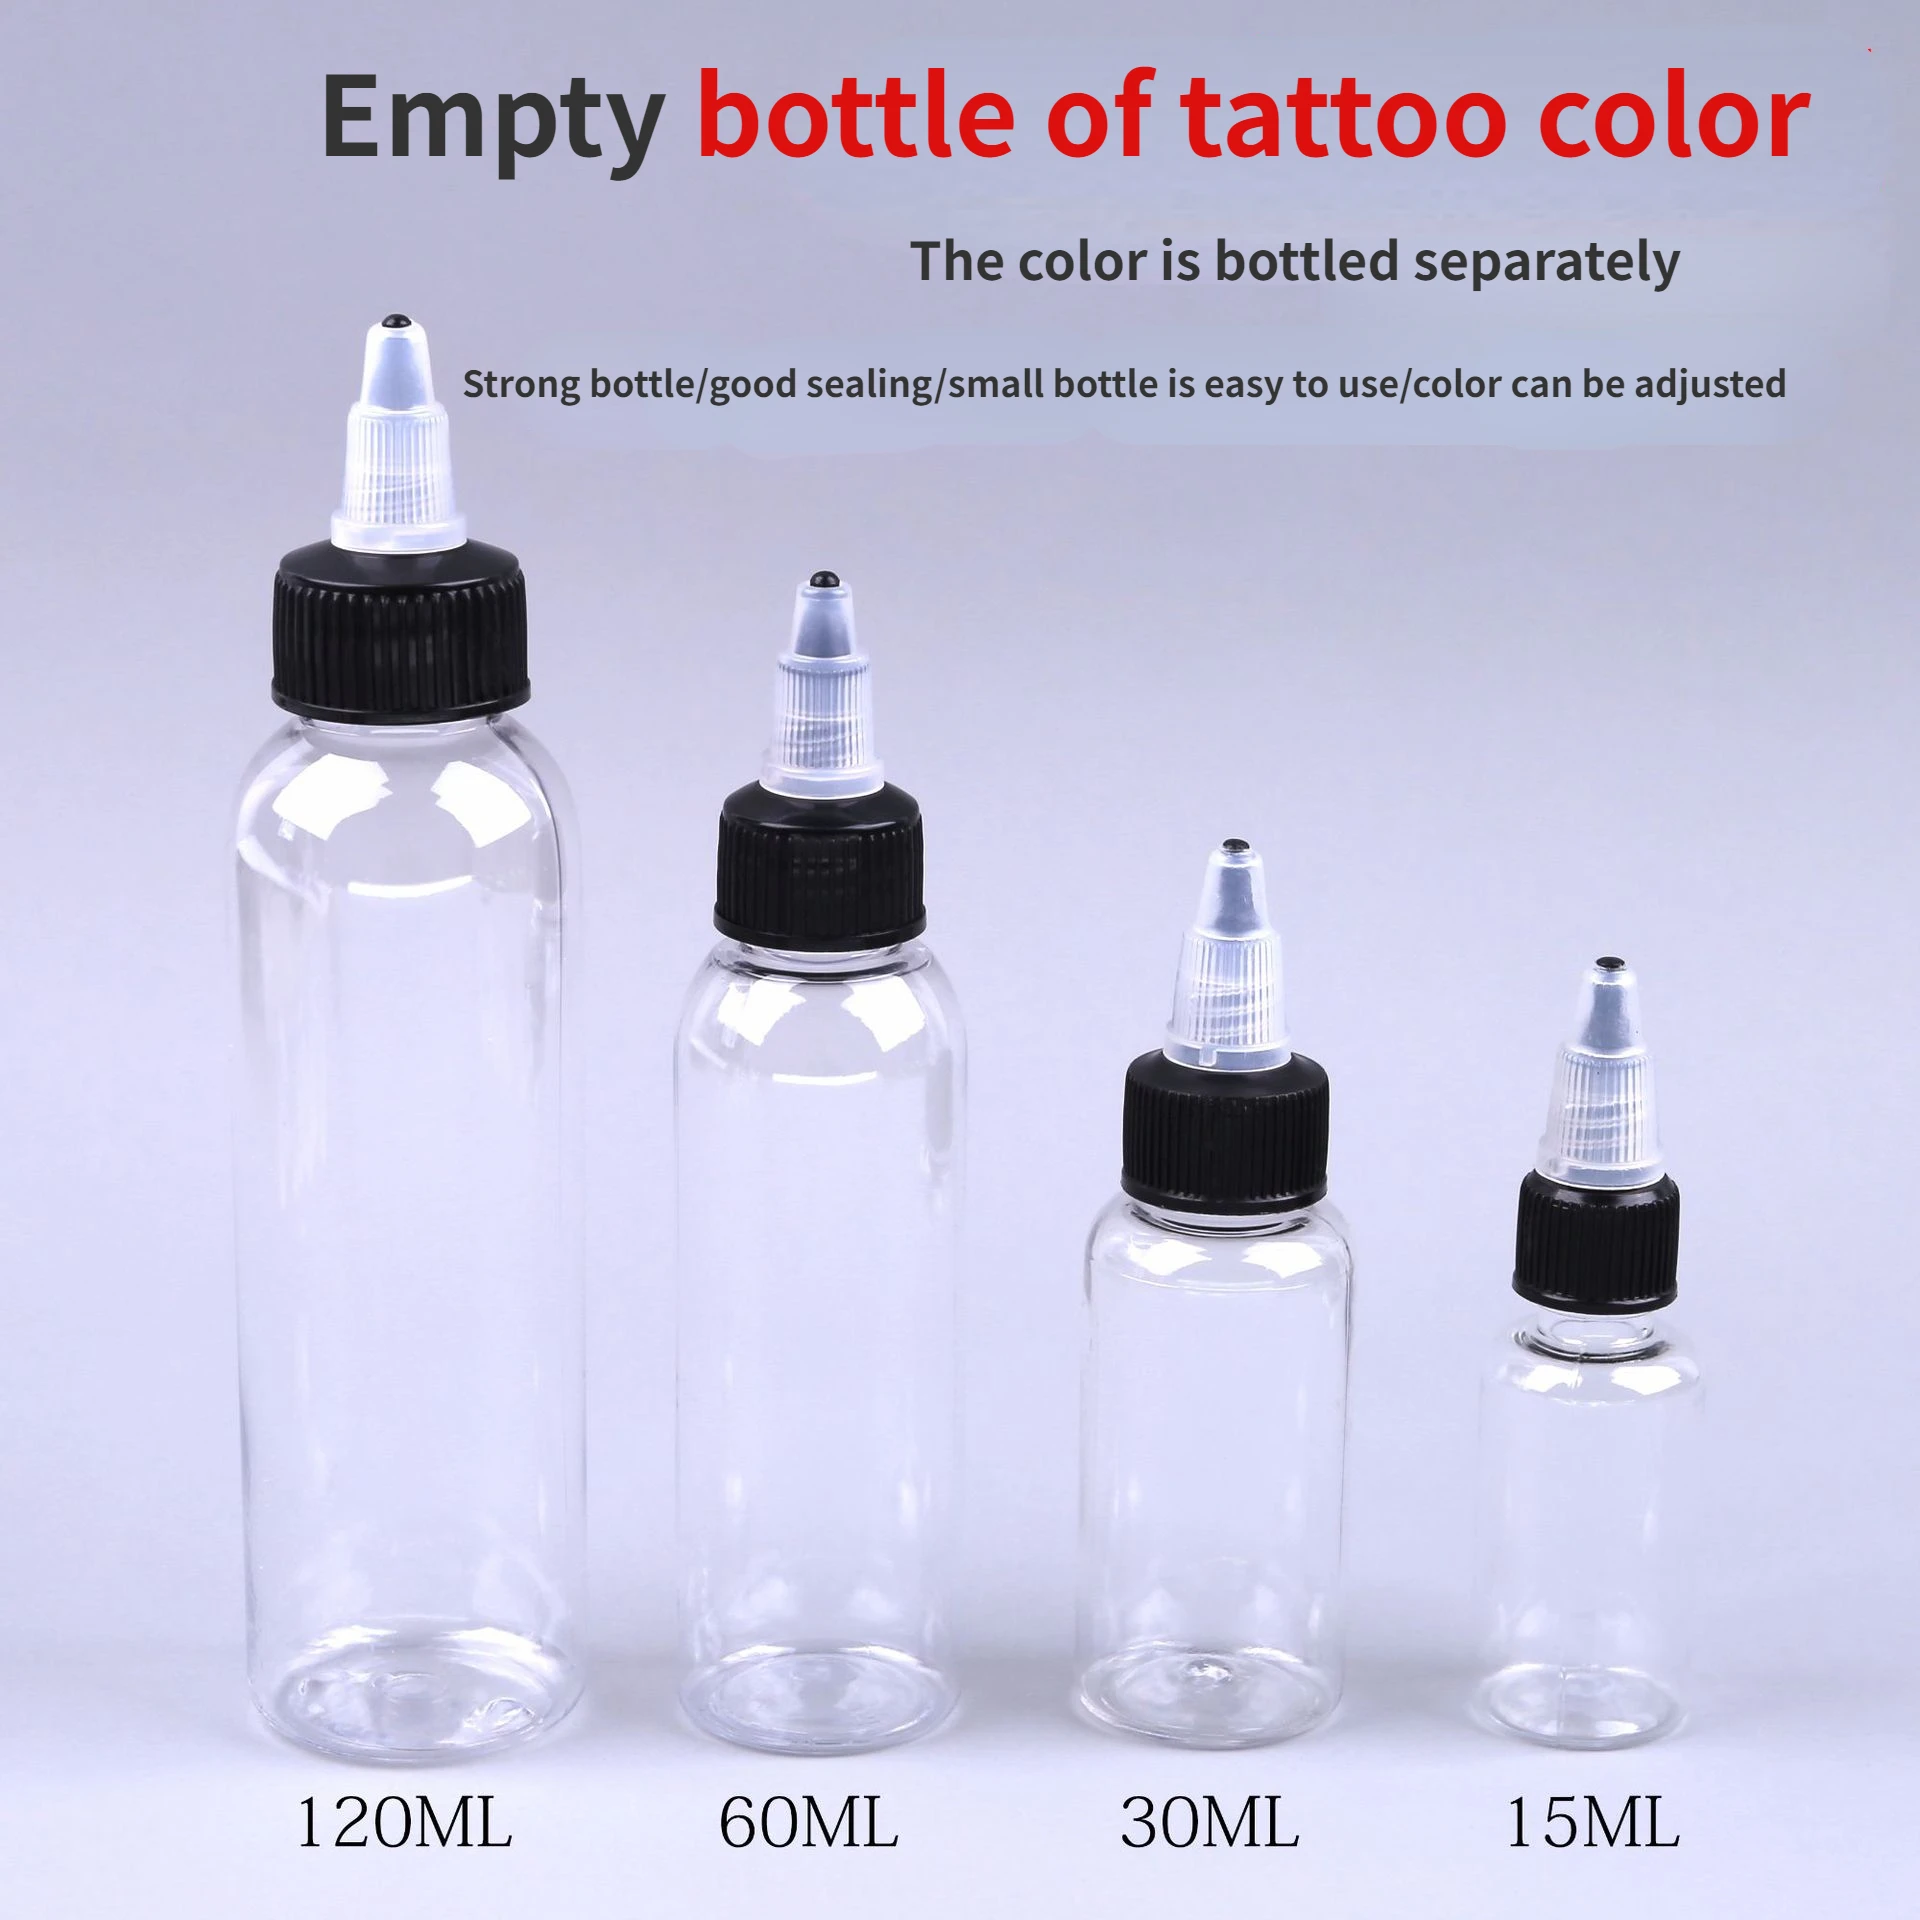 

5PCS 15ML /30ML /60ML /120ML Recyclable Clear Tattoo Airbrush Ink Pigment Bottles Empty Bottle Container Airbrush Ink Bottle Art